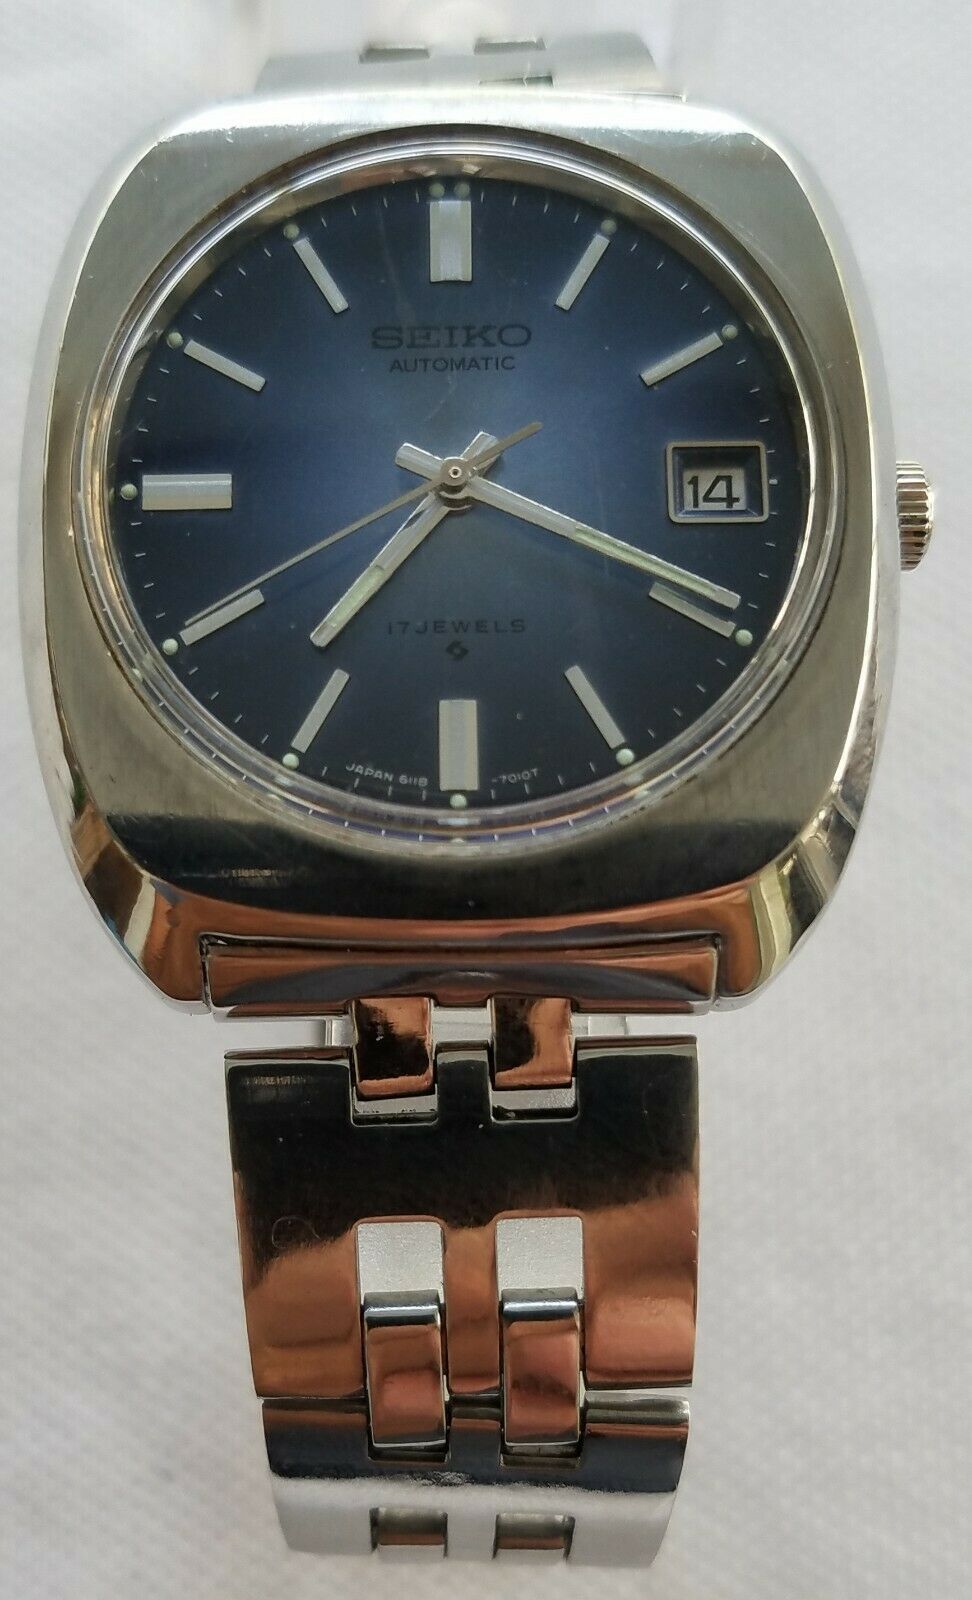 At understrege Dolke Guggenheim Museum Seiko 6118-7010 Automatic Stunning Blue Dial 1975 May | WatchCharts